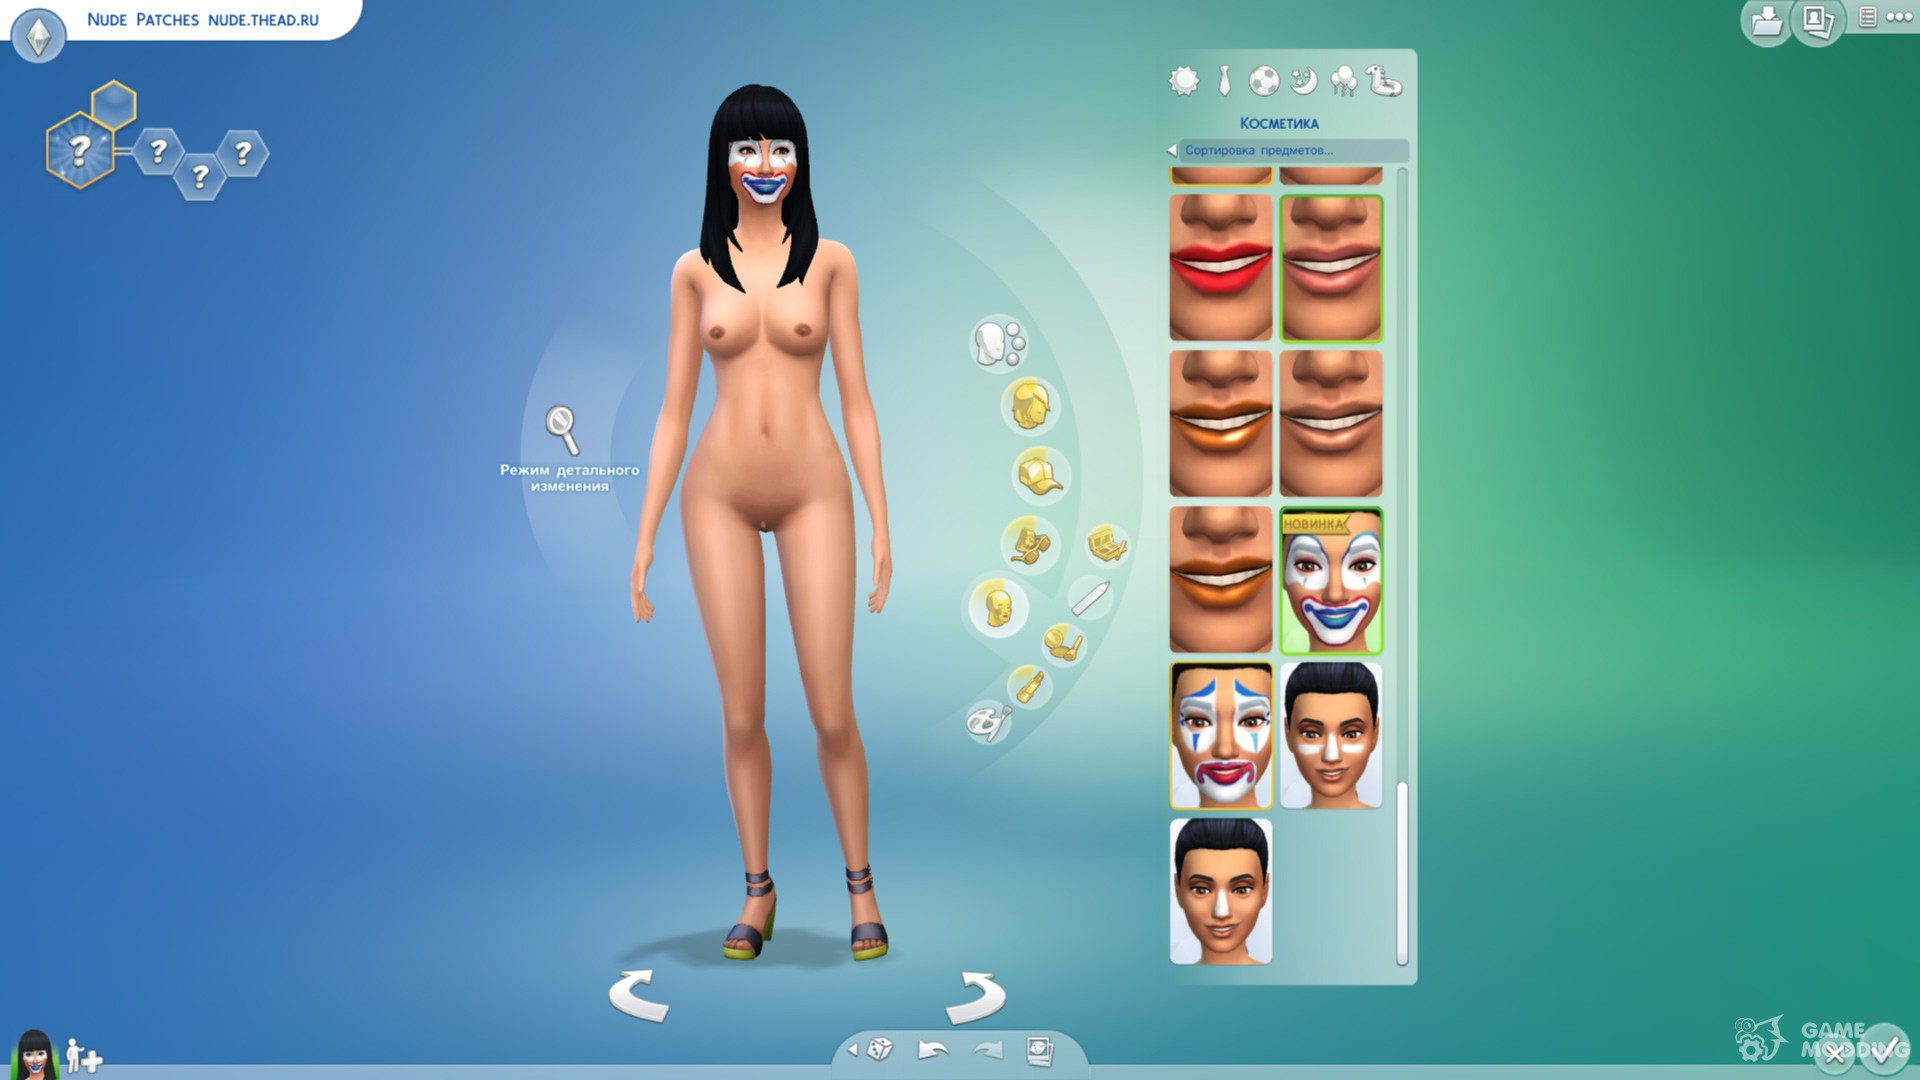 david hayday recommends Sims 4 Cc Naked